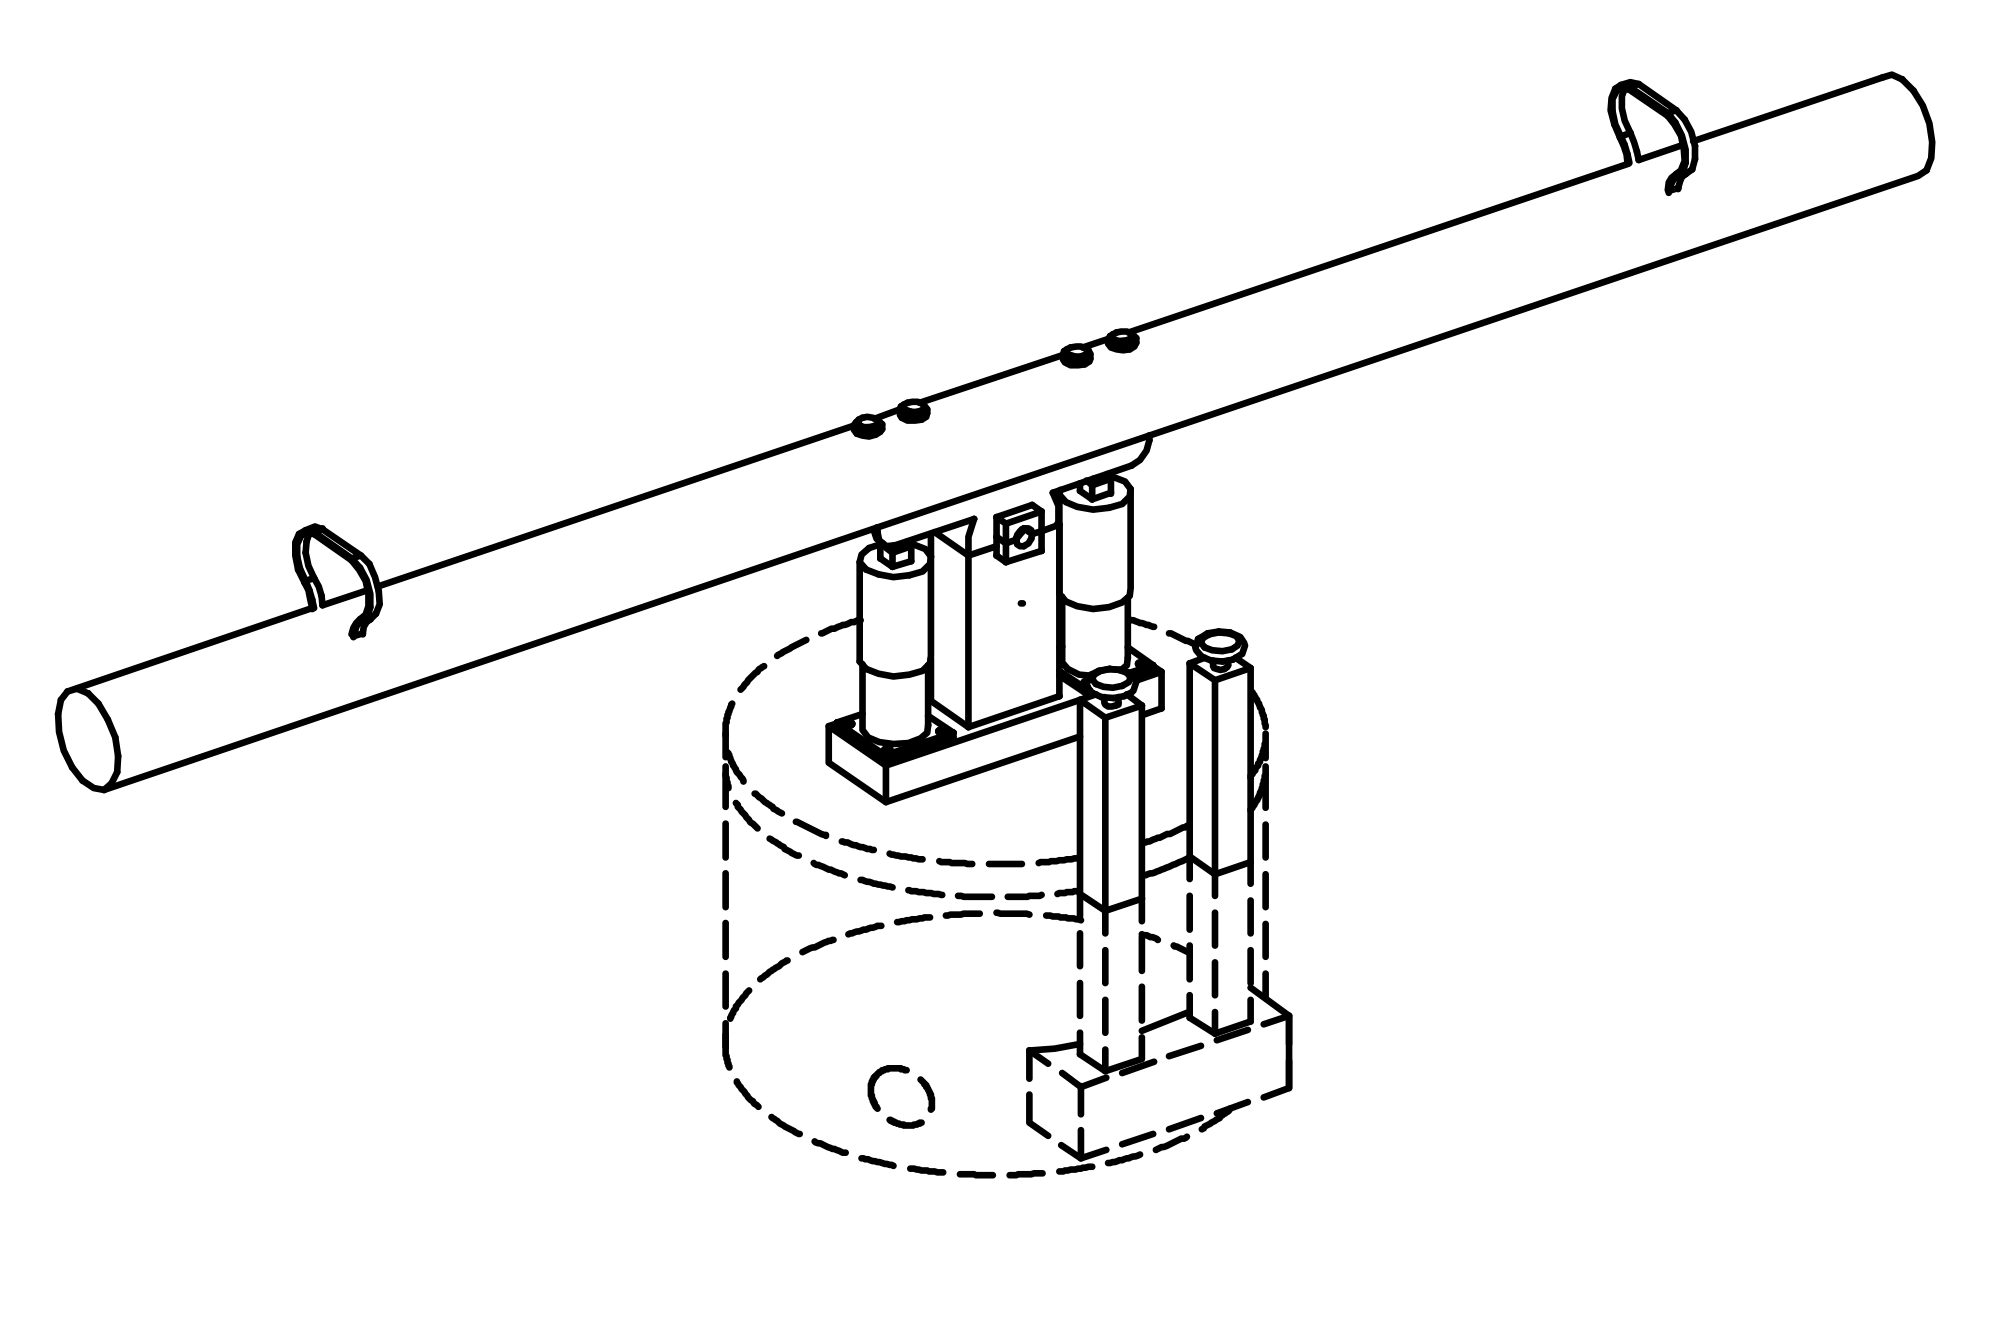 Pump See-saw with valve assembly and two way distribution